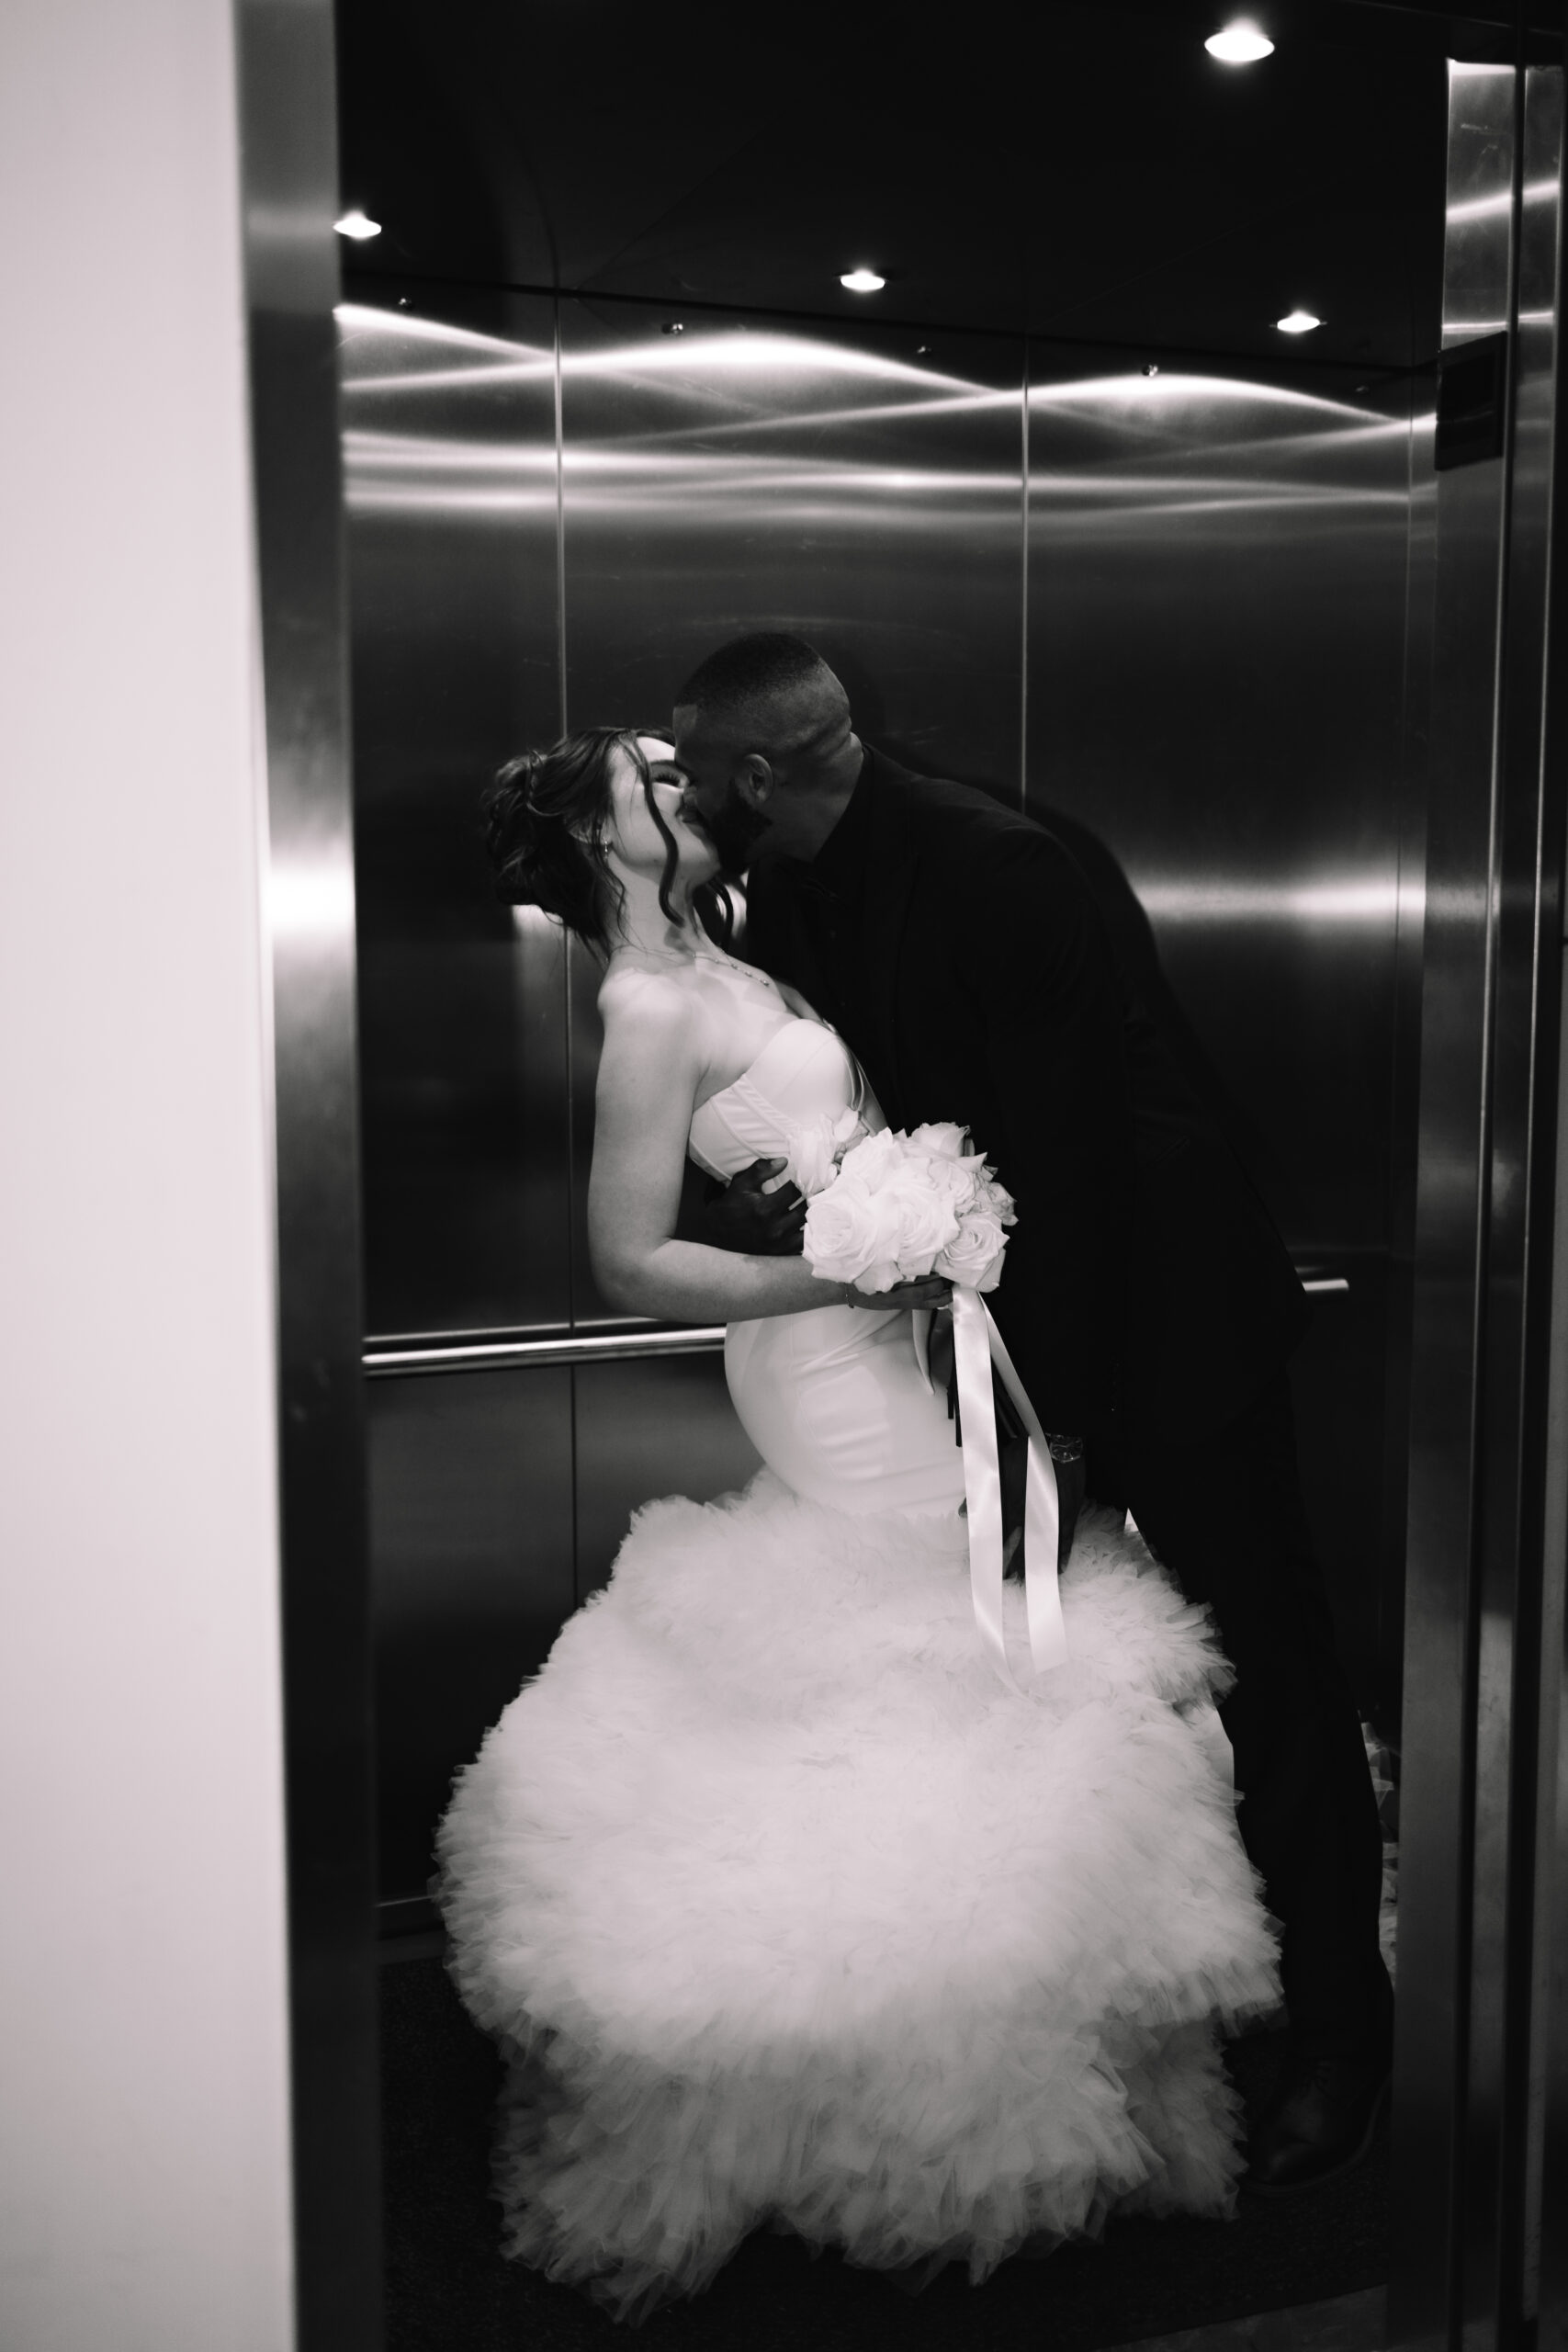 A flash photo of a bride and groom kissing in the elevator as the doors are closing 